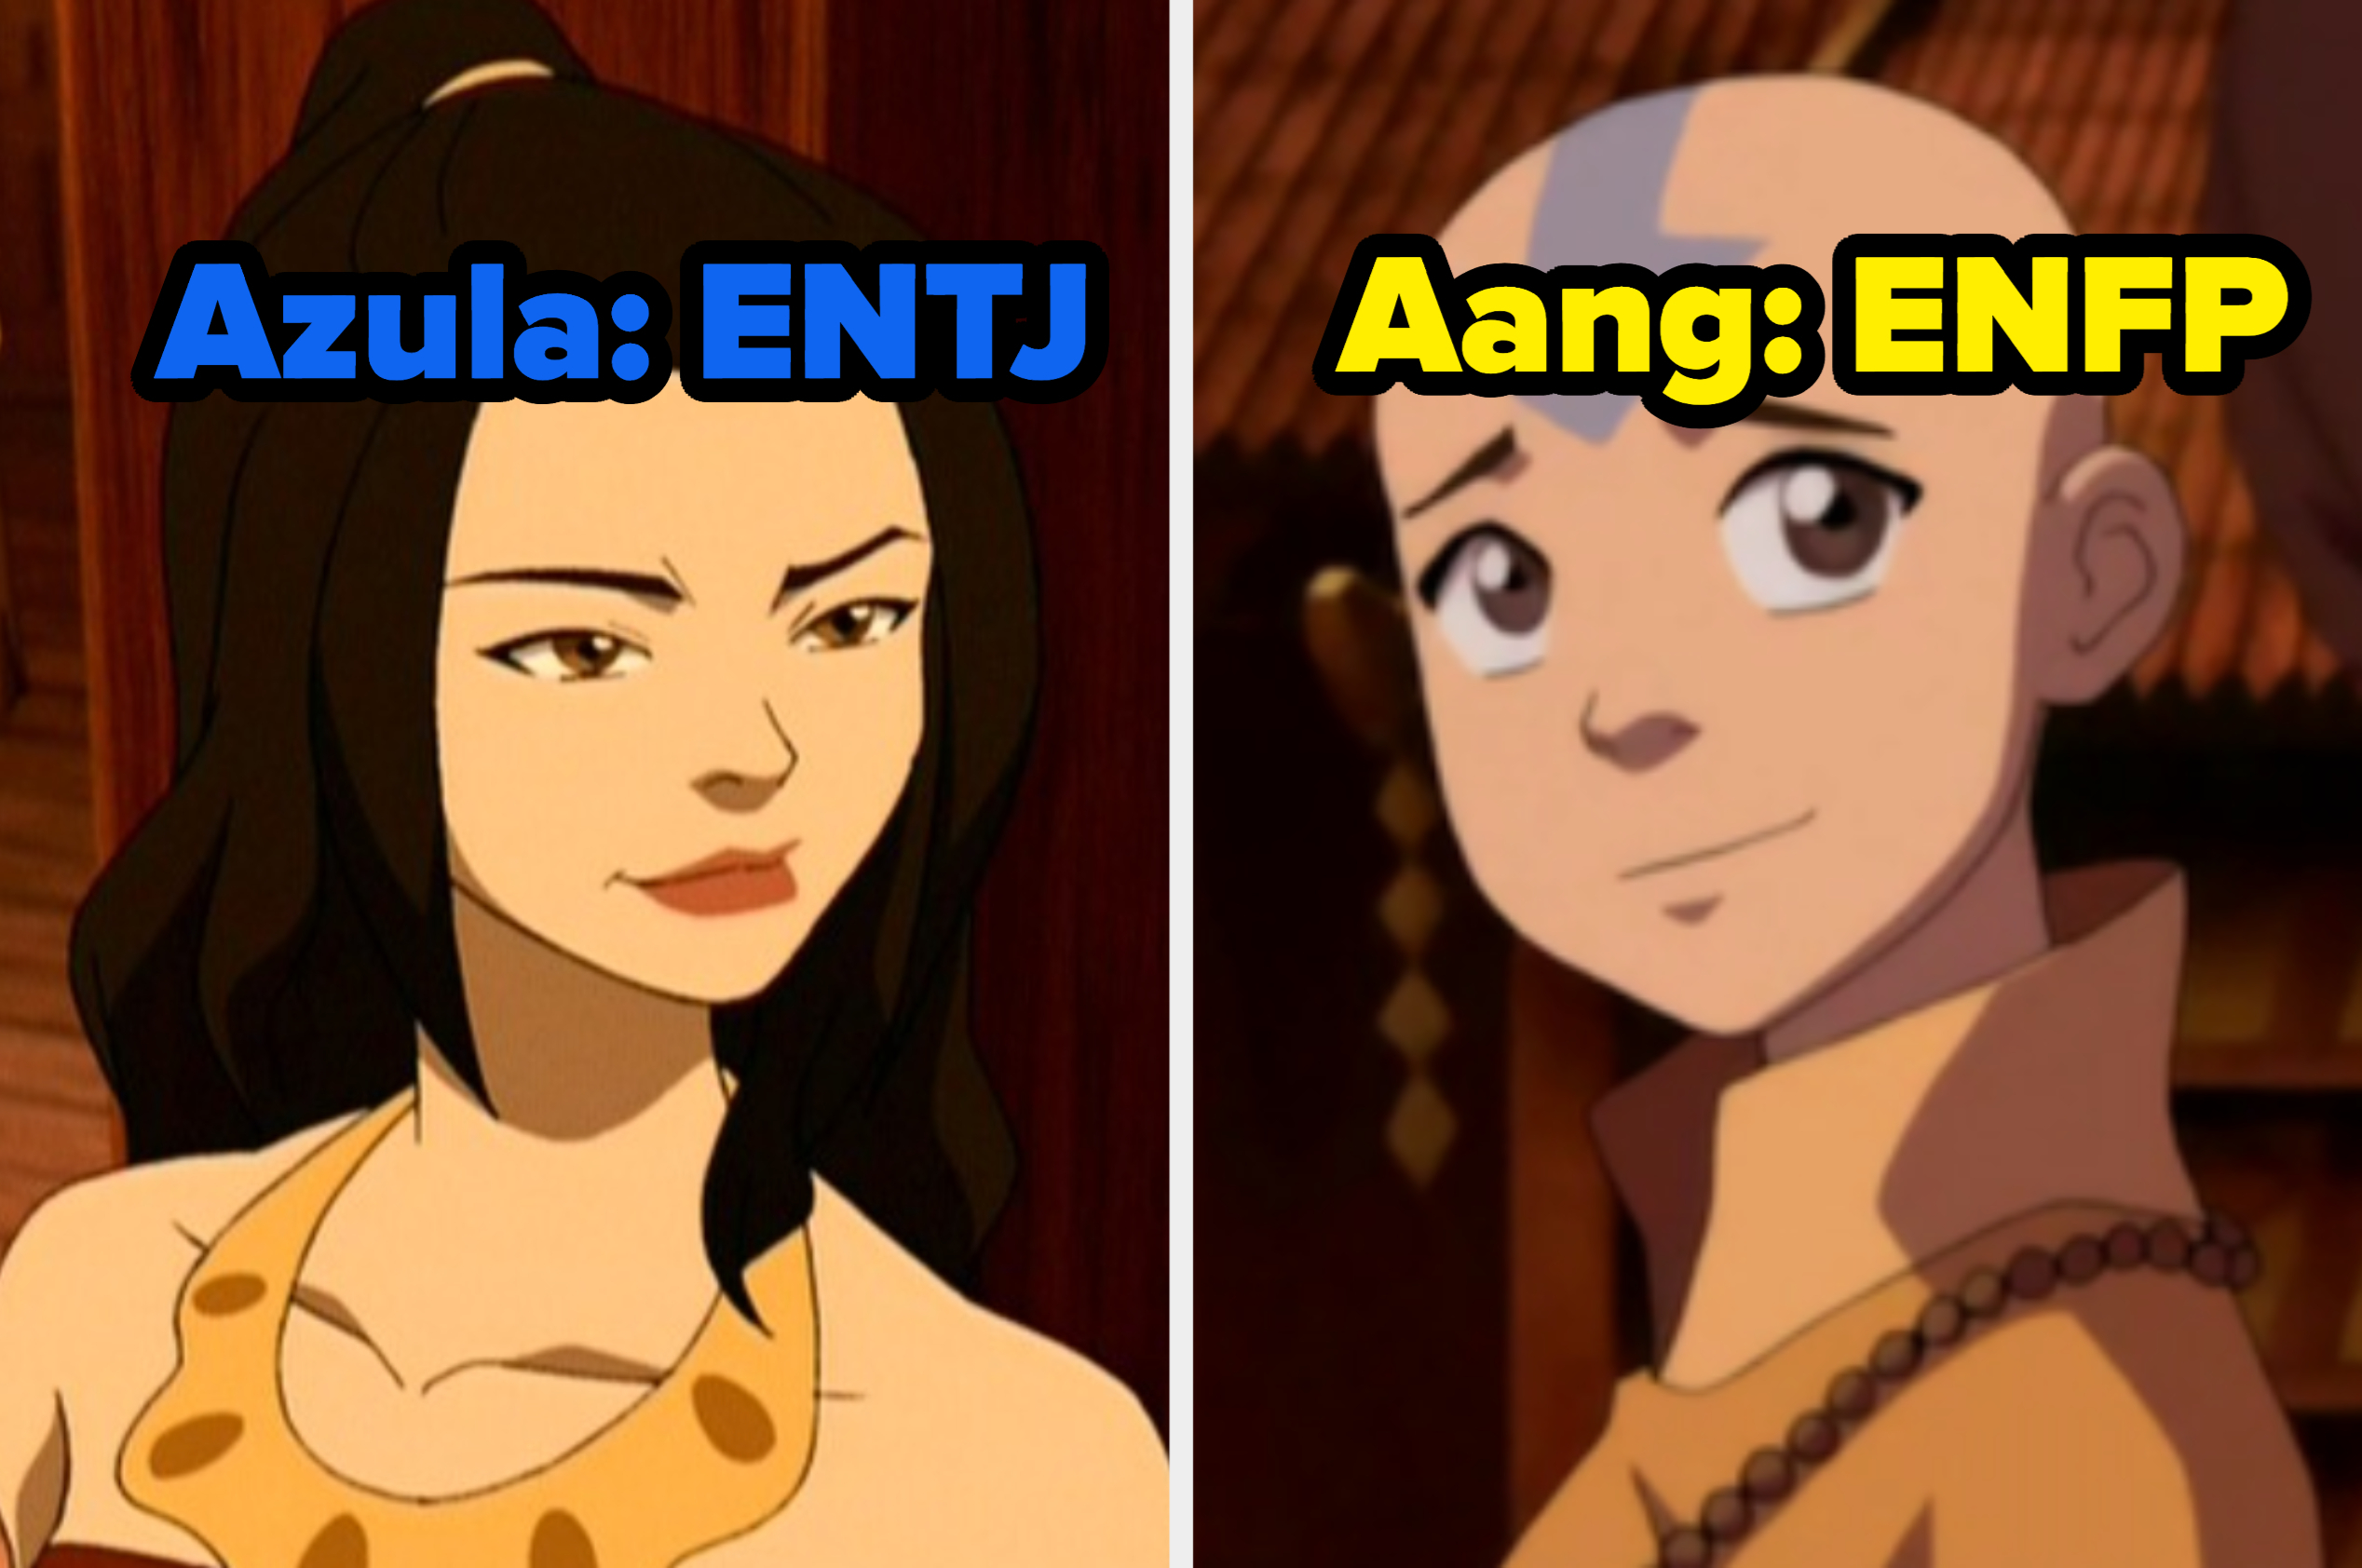 16 Personalities as Avatar: The Last Airbender Moments! 😍, ATLA (out of  context)